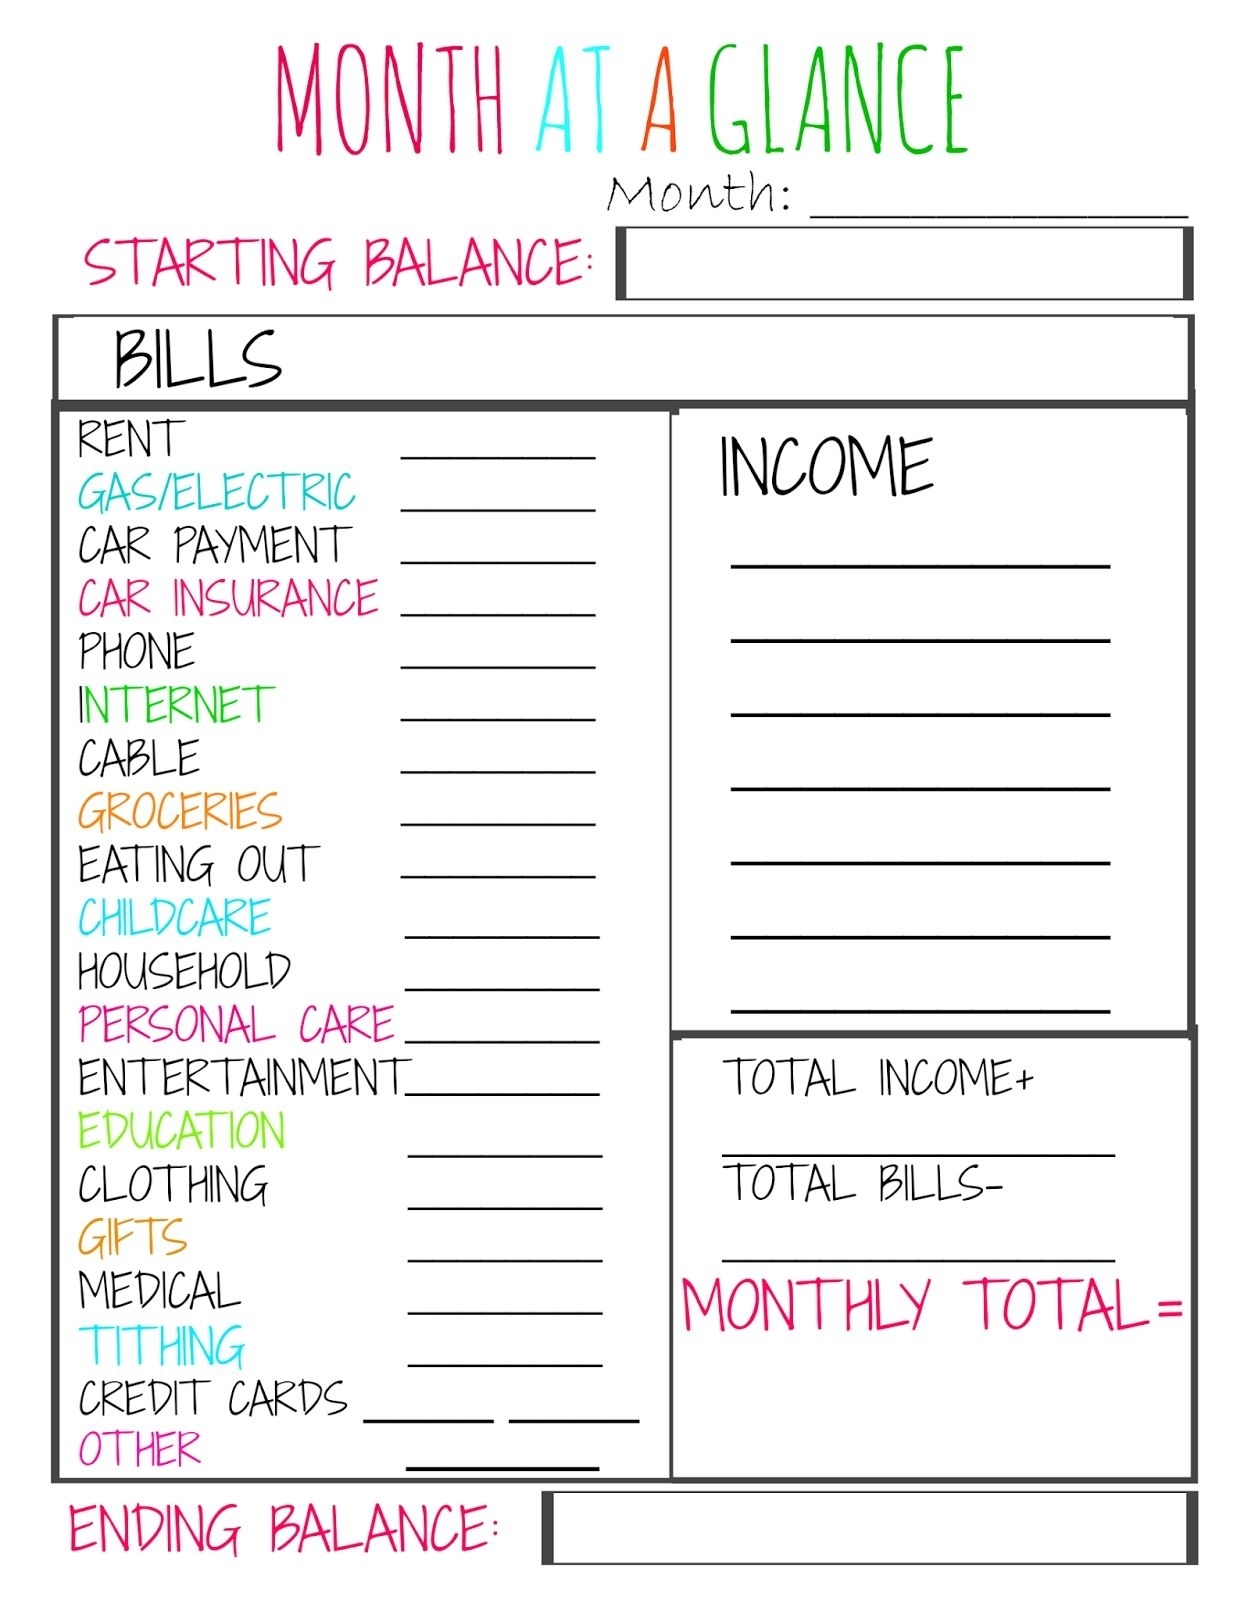 Month At A Glance Budget Worksheet In 2020 | Budgeting Money